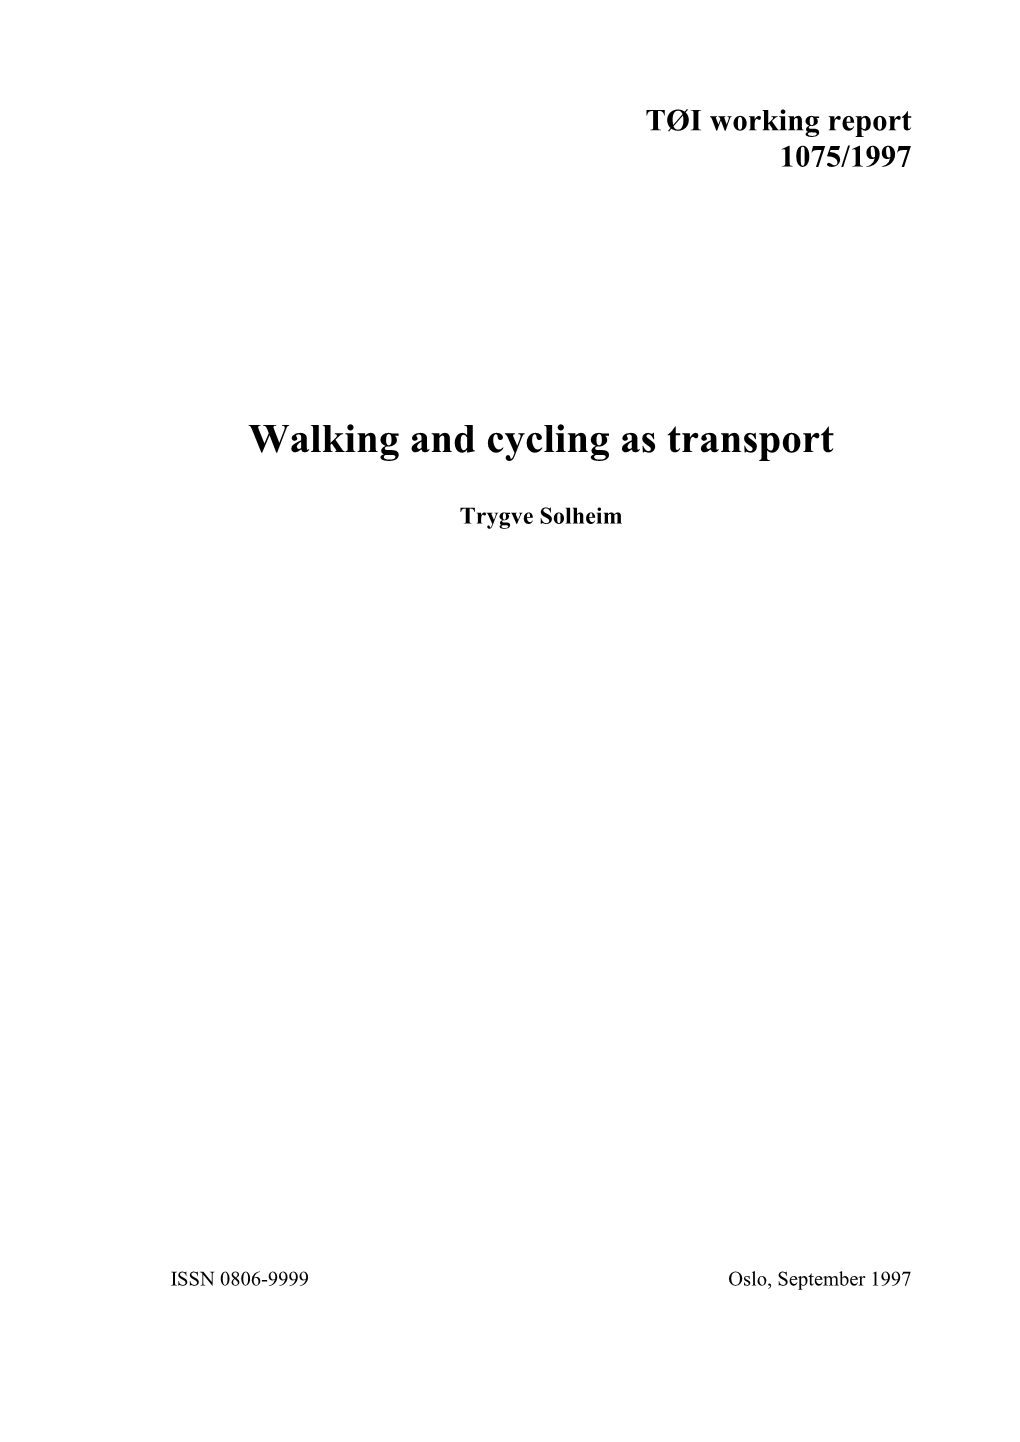 Walking and Cycling As Transport